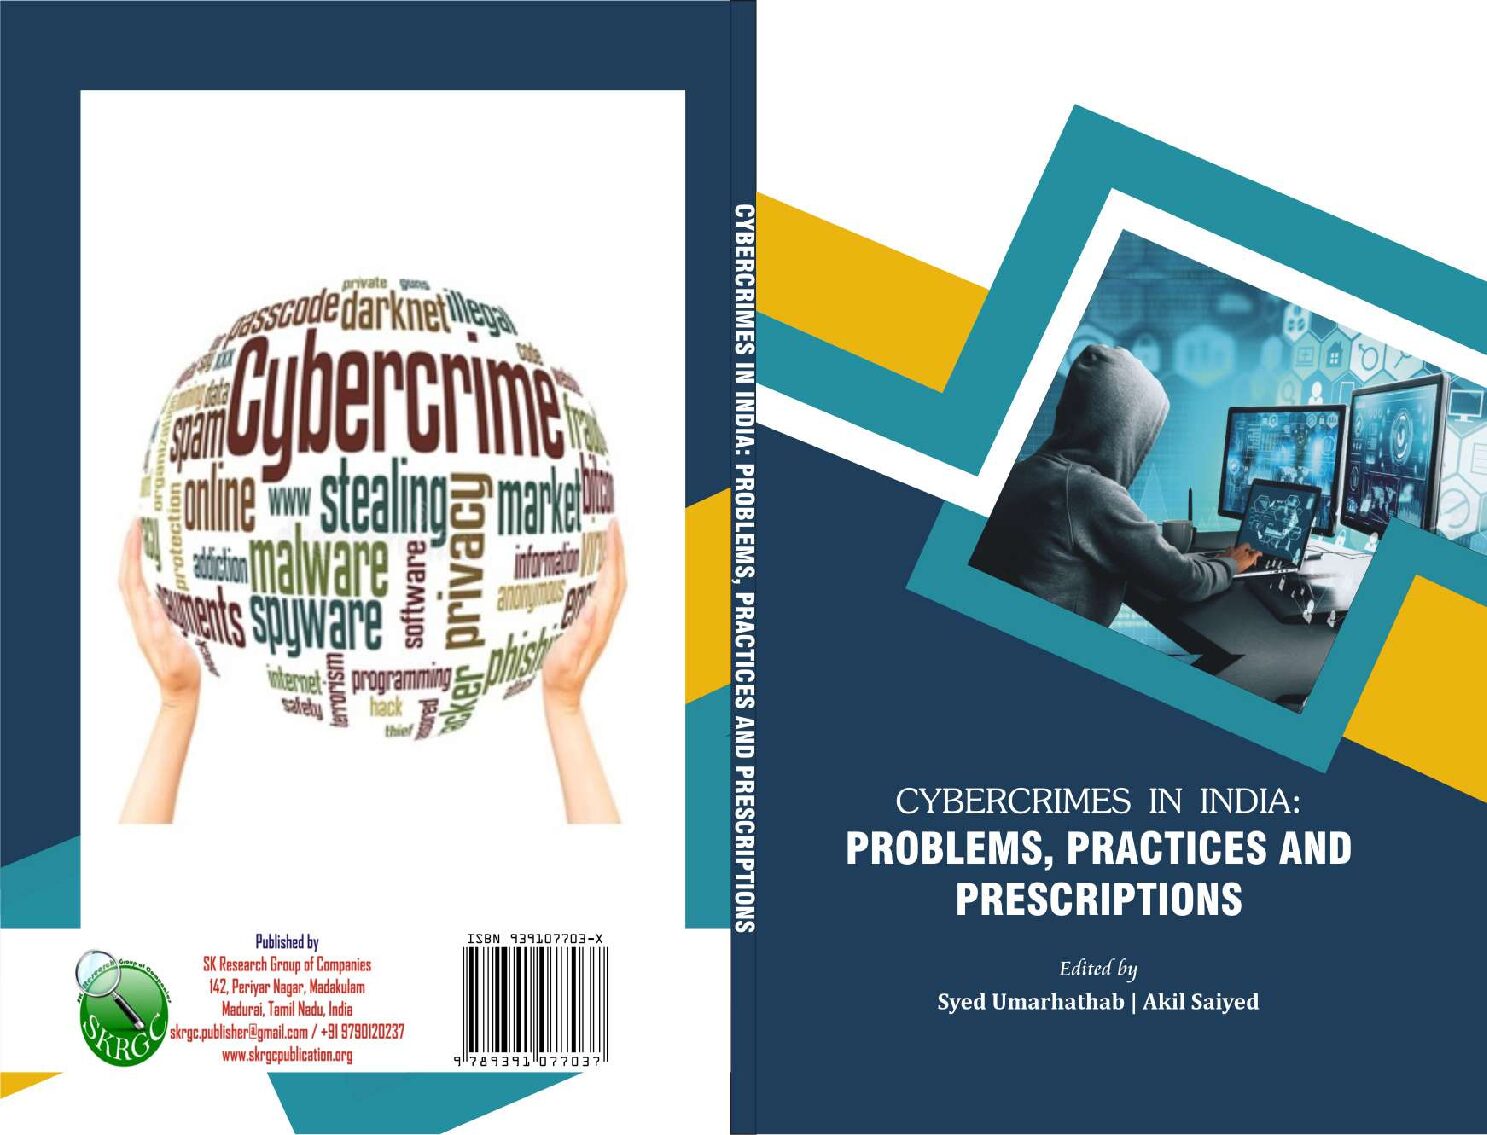 Cybercrimes in India : Problems, Practices and Prescriptions